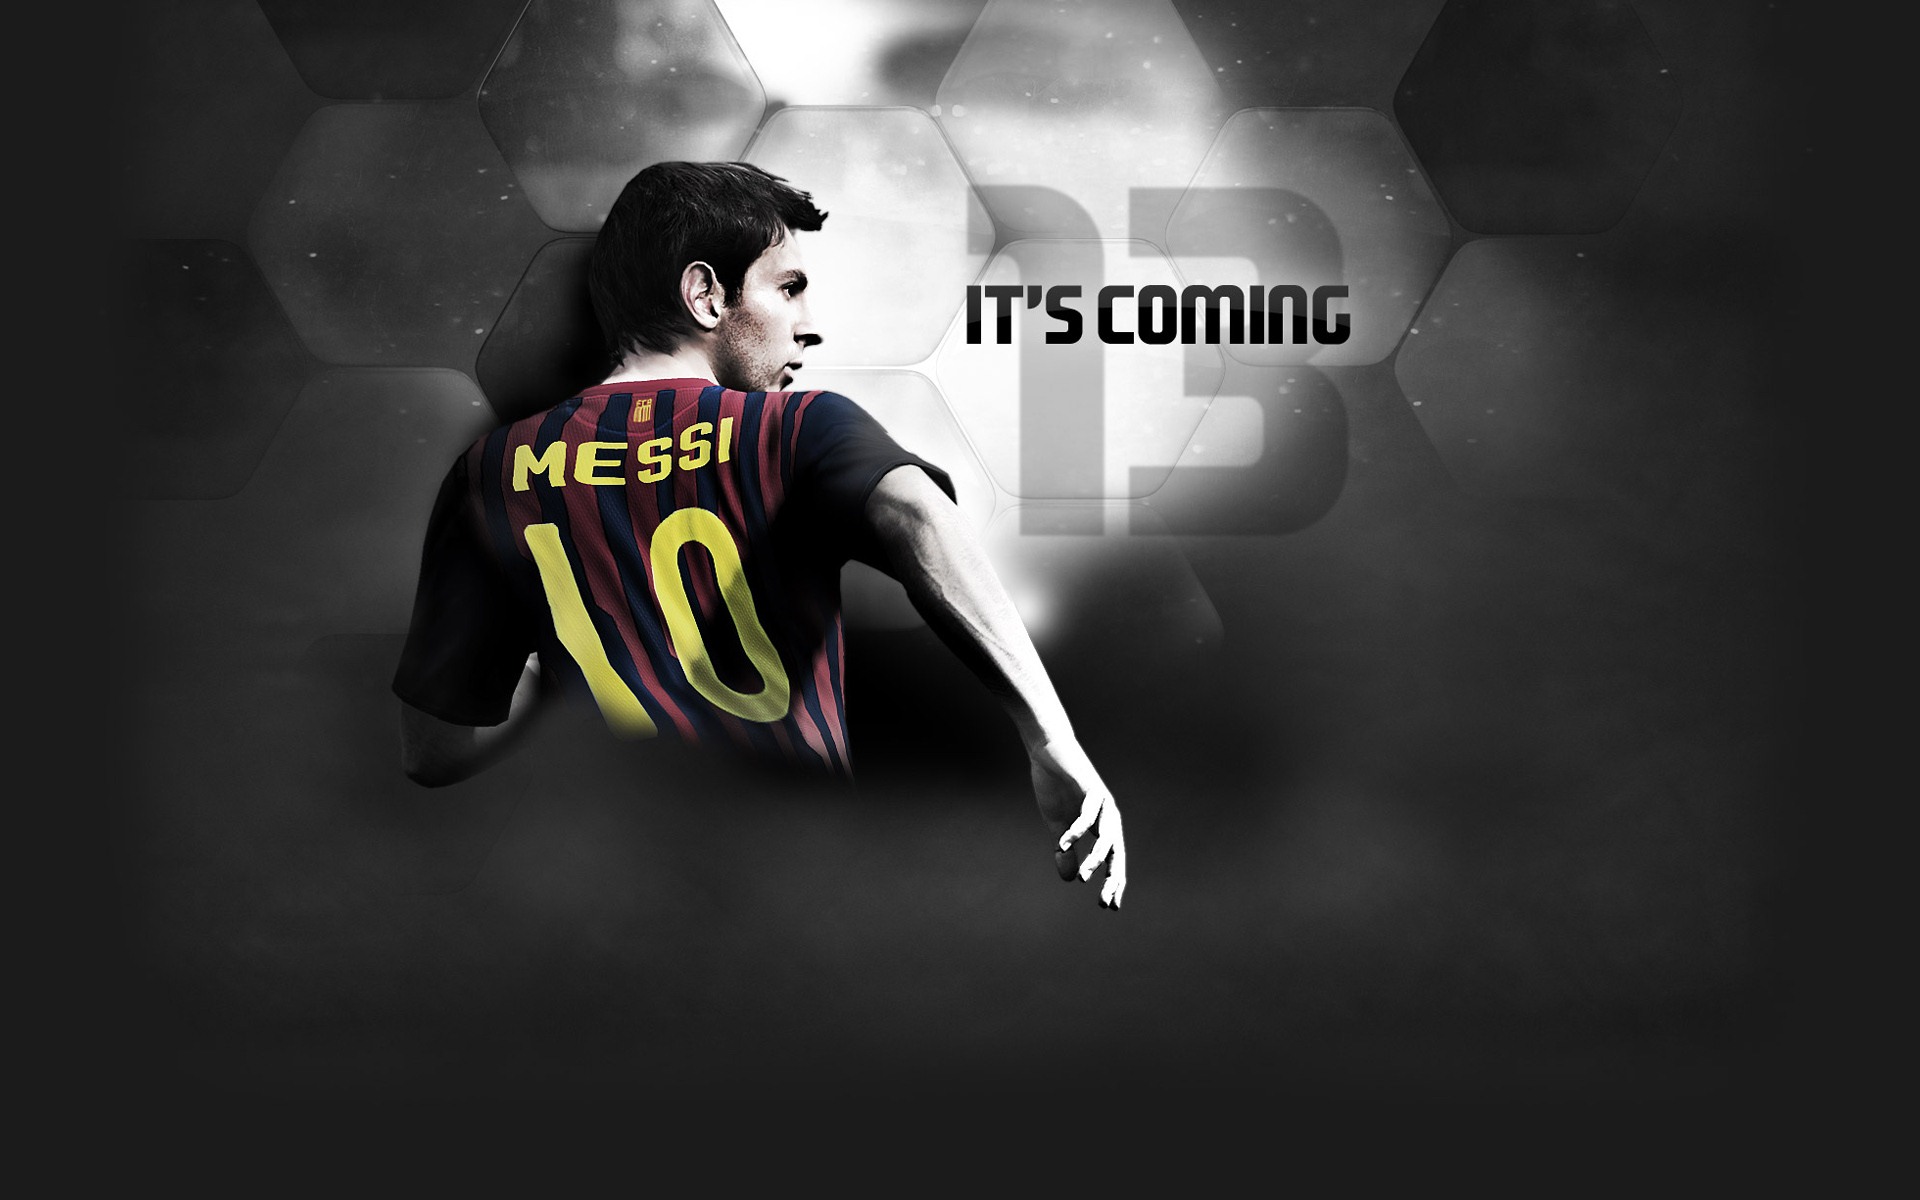 FIFA 13 game HD wallpapers #3 - 1920x1200